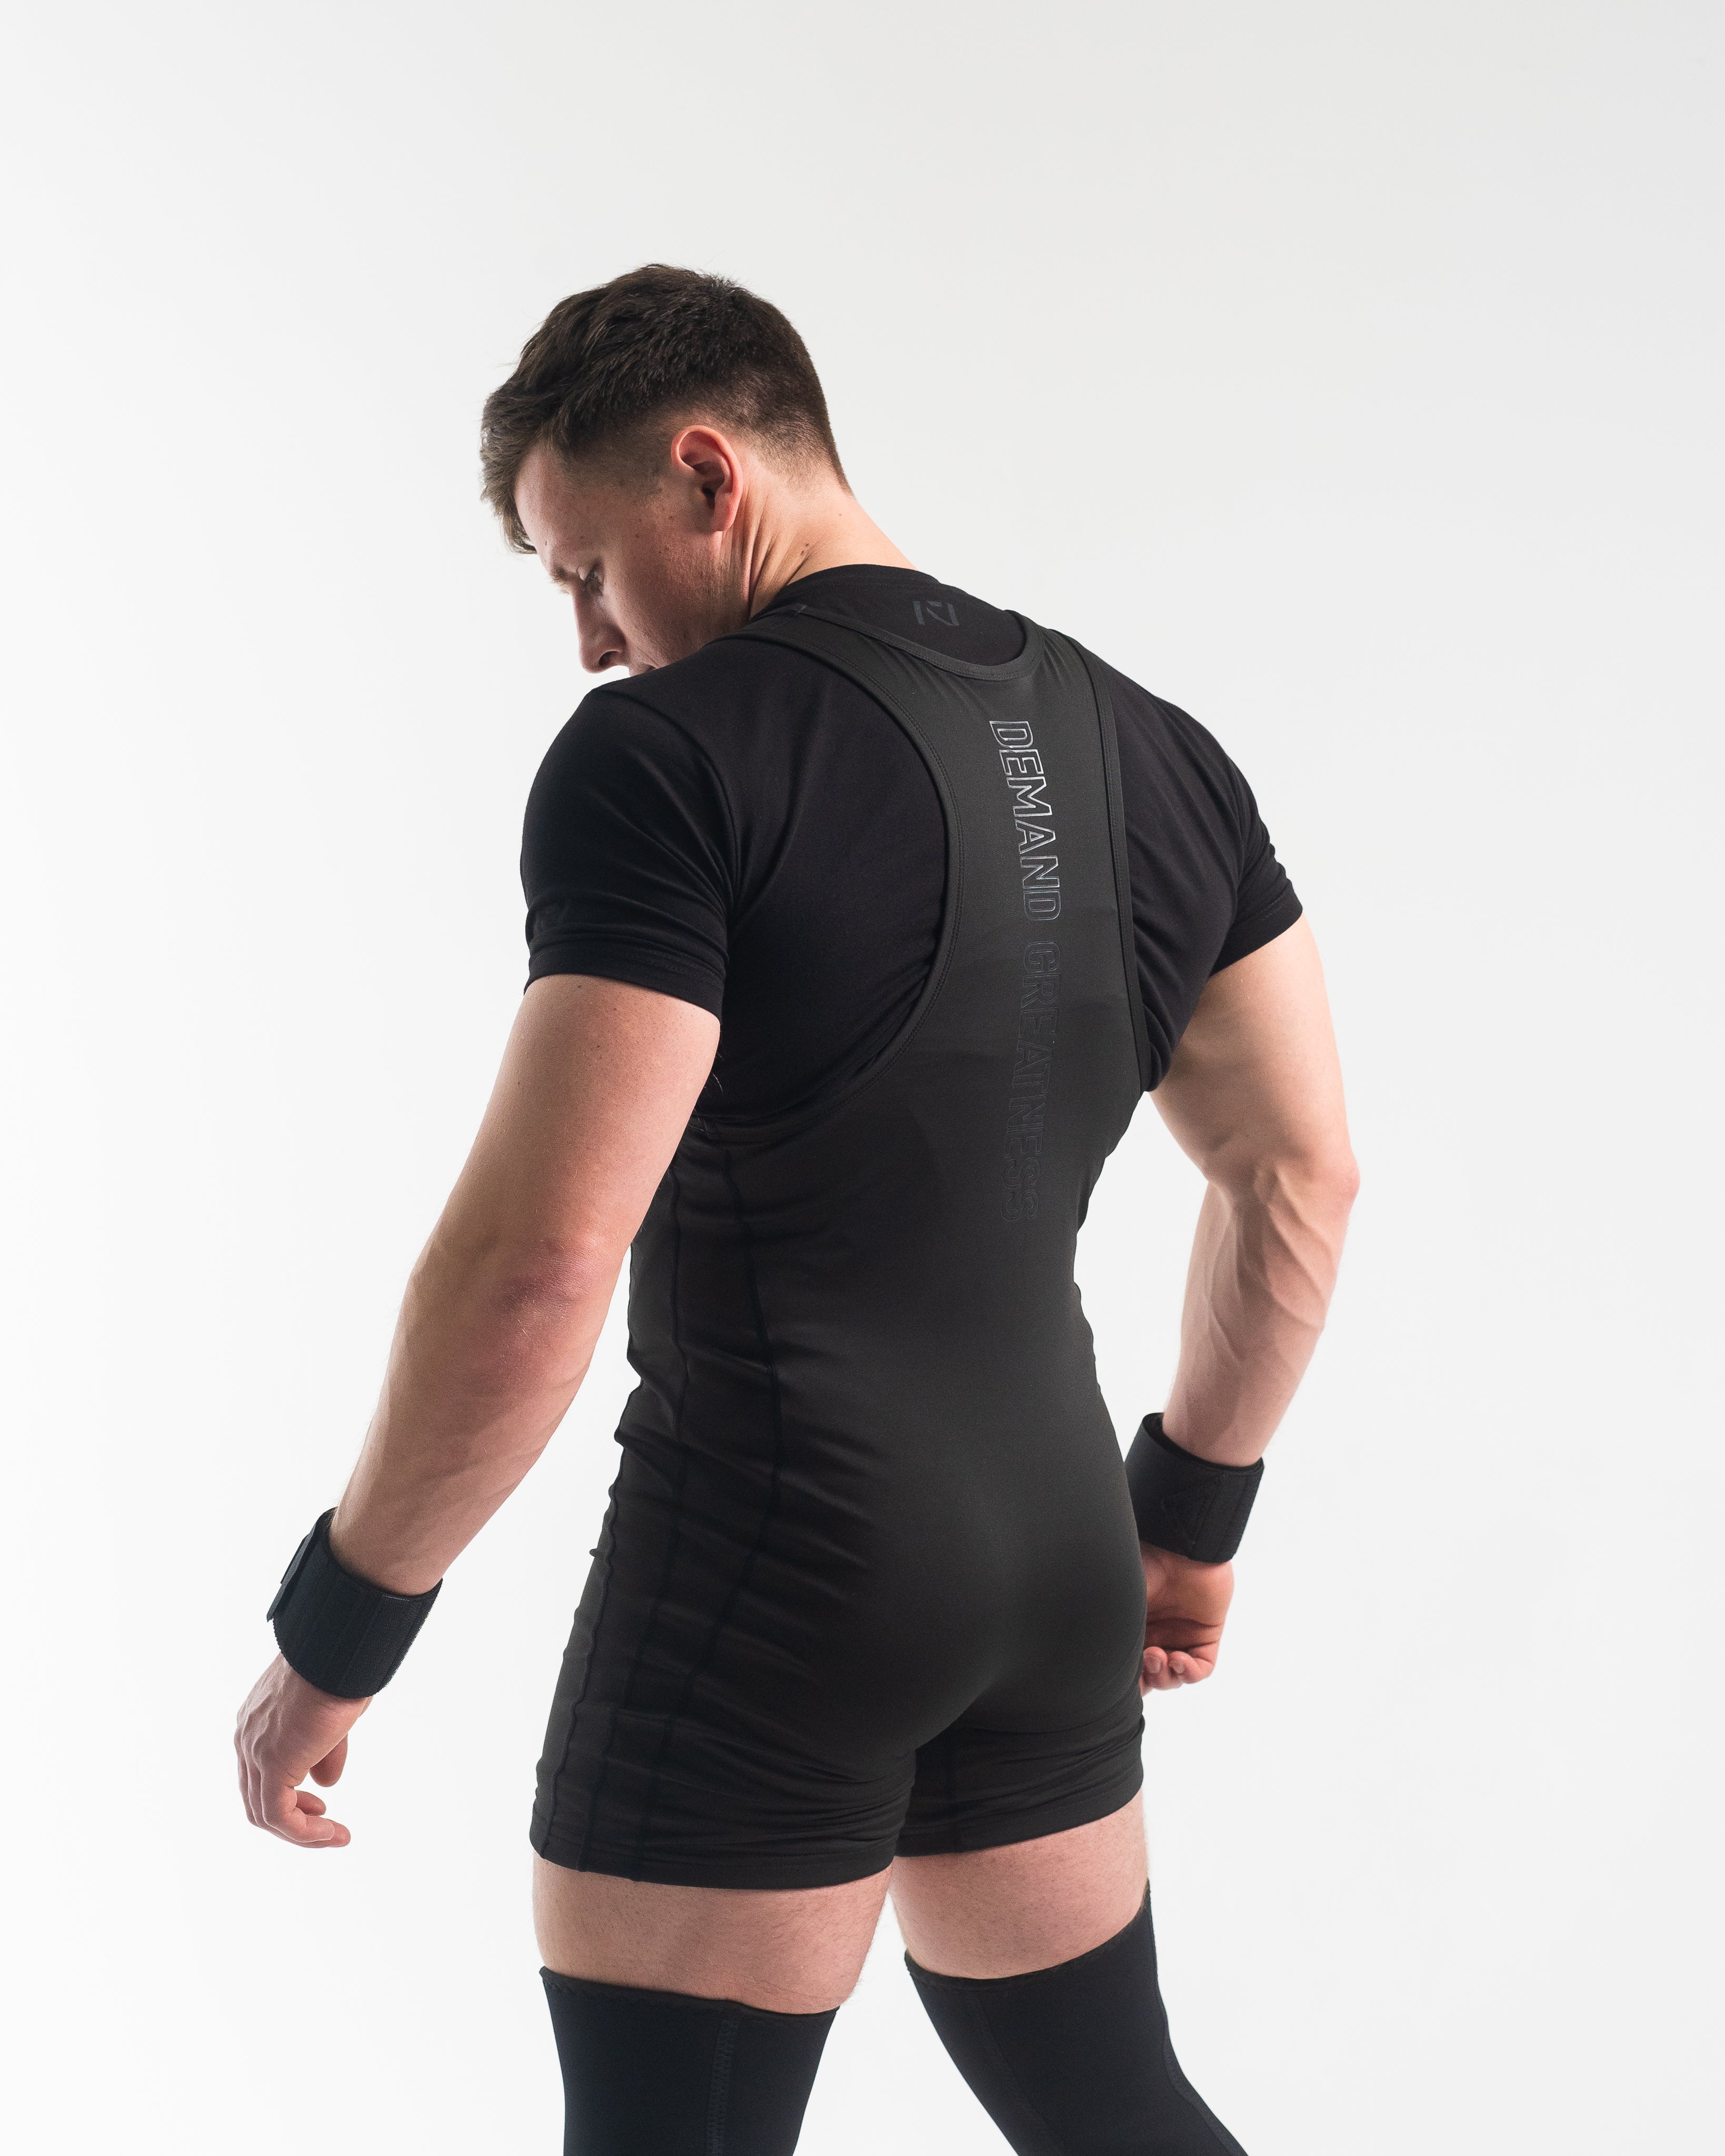 A7 Singlet - Gold Standard - IPF Approved